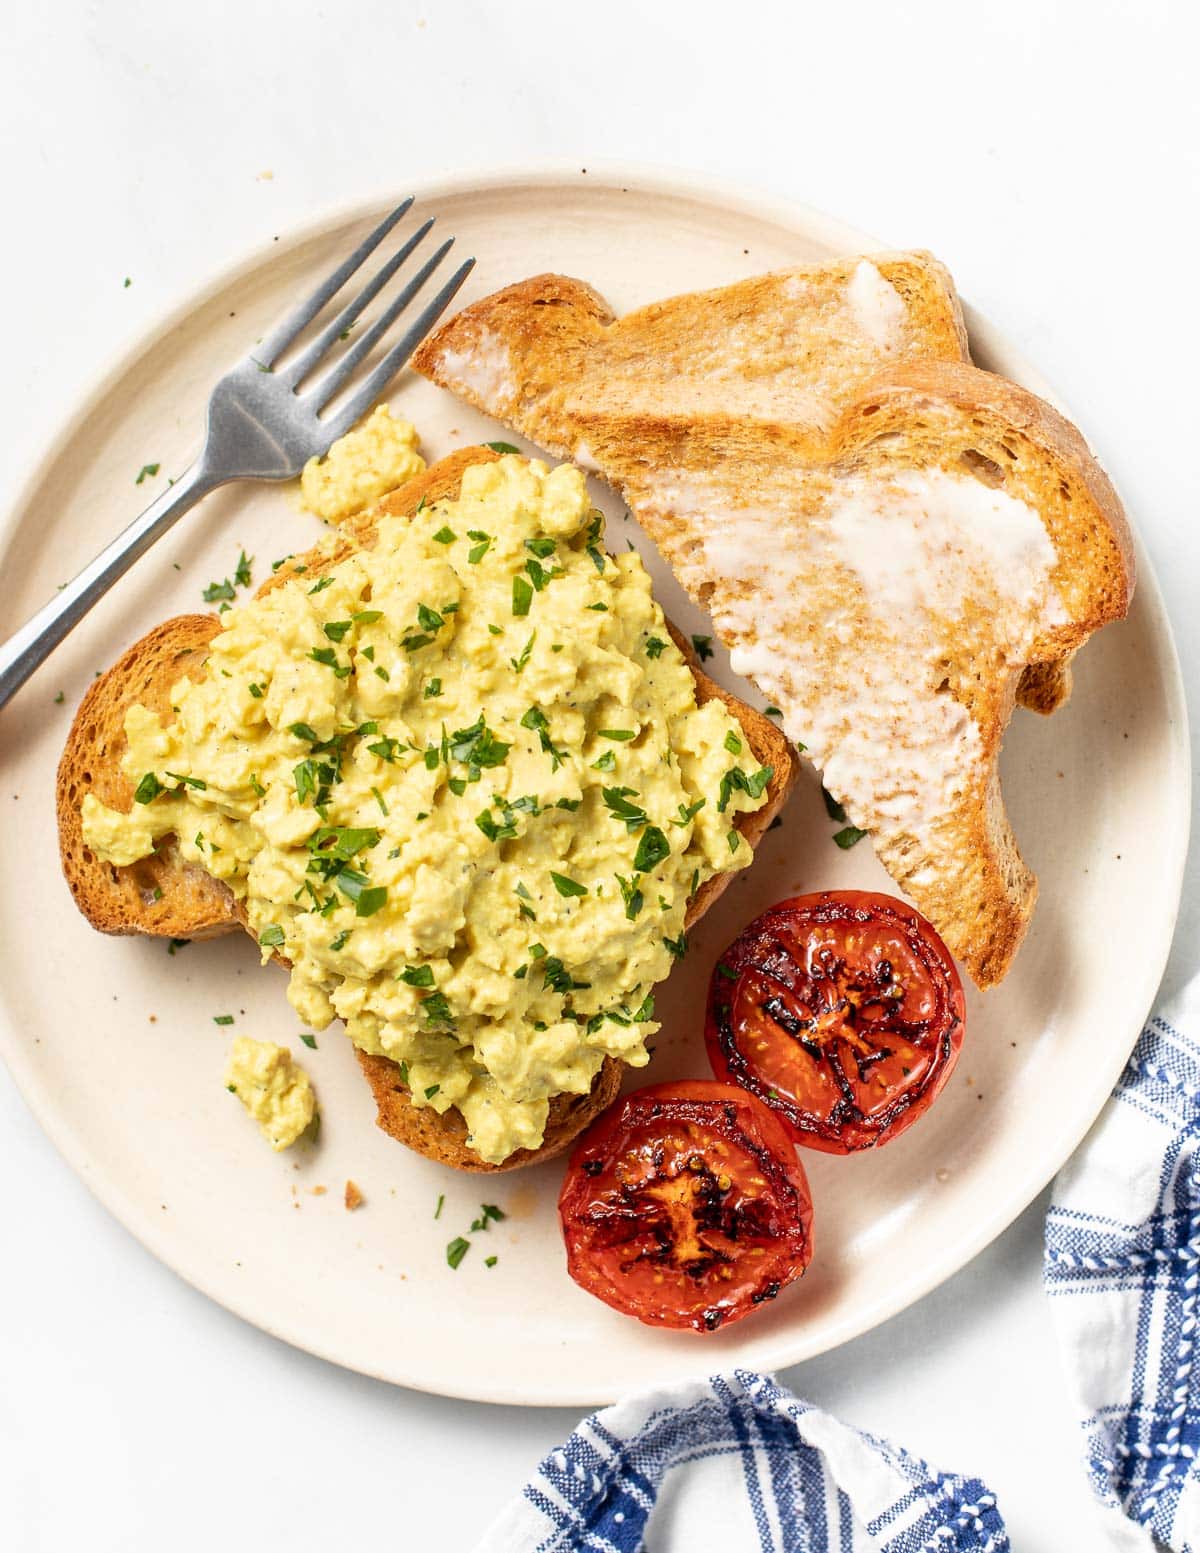 vegan scrambled eggs on toast with grilled tomatoes